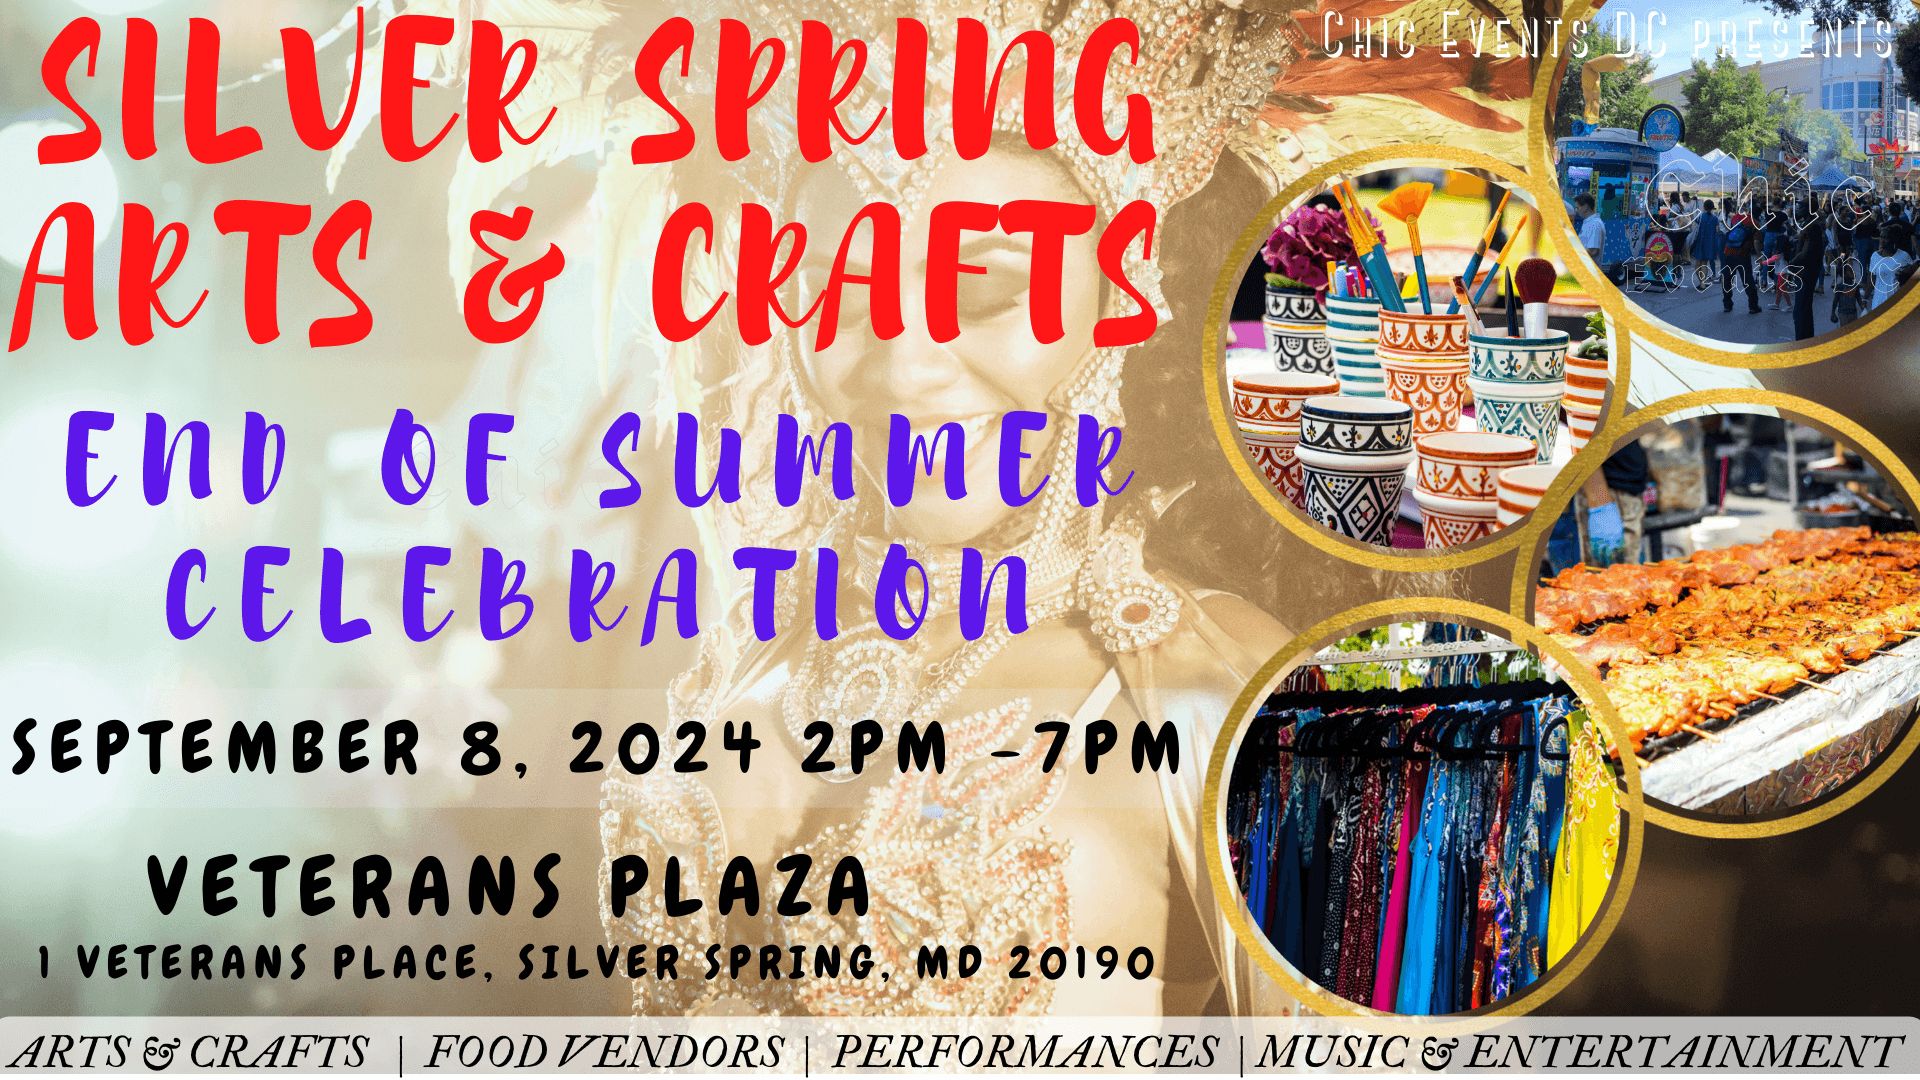 Silver Spring Arts and Crafts End Of Summer Celebration @ Veterans Plaza, Silver Spring, Maryland, United States